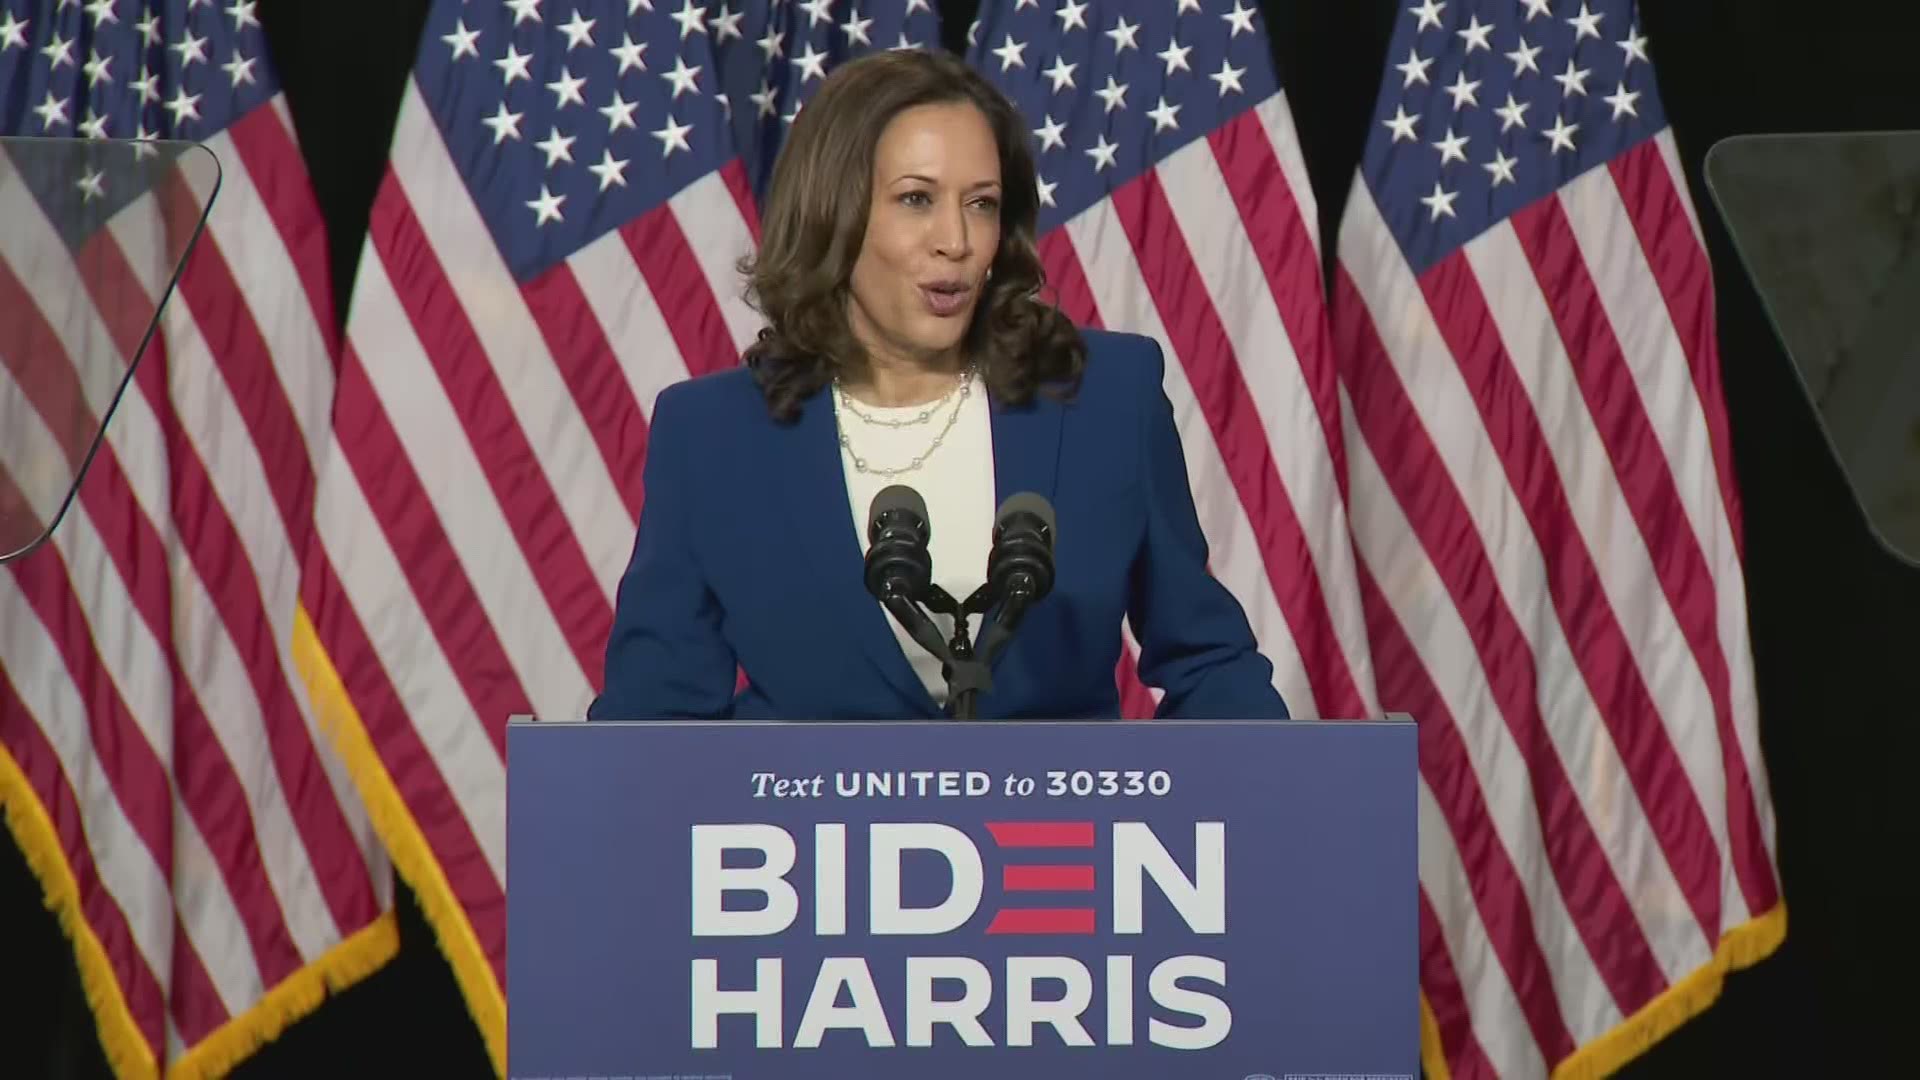 Senator Kamala Harris said Wednesday that she's incredibly honored to be Joe Biden's running mate and is ready to get to work.